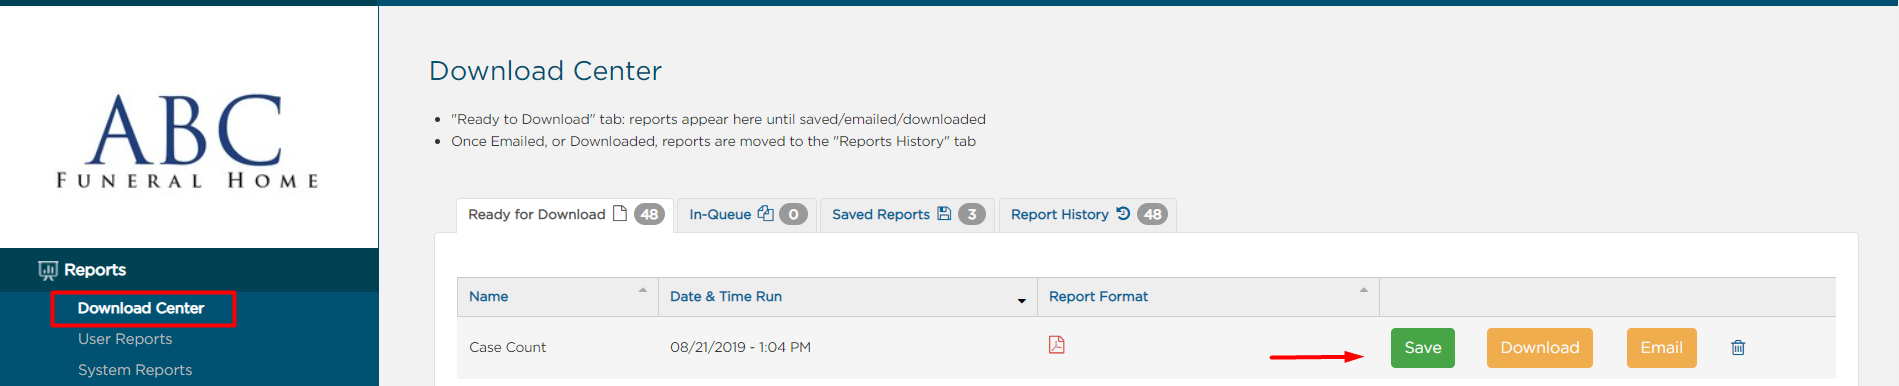 in Download Center, buttons to Save, Download, or Email the report